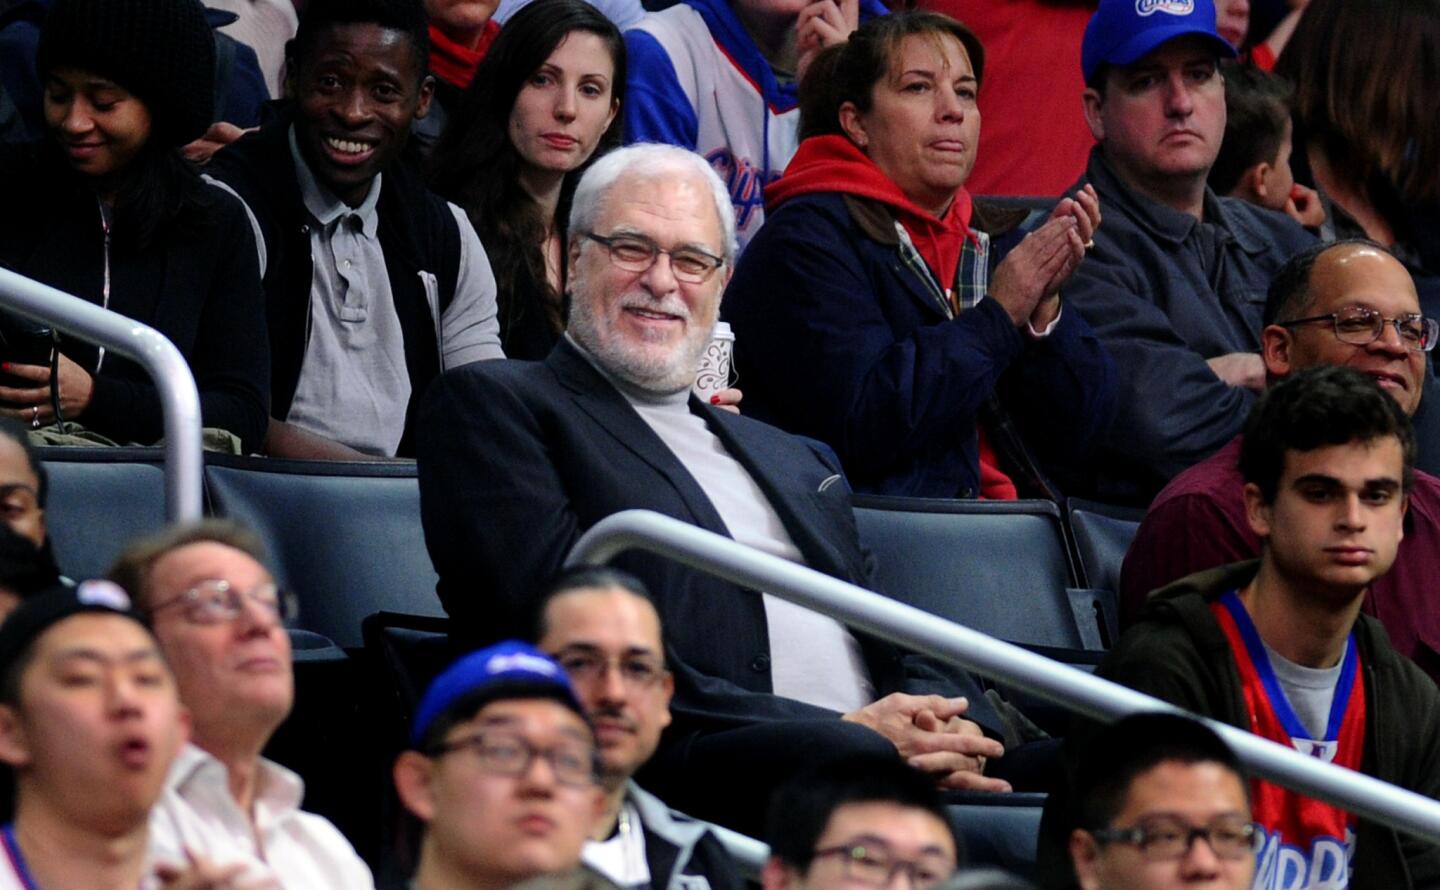 Former Lakers coach and Knicks President Phil Jackson watches the game at Staples Center on Wednesday.